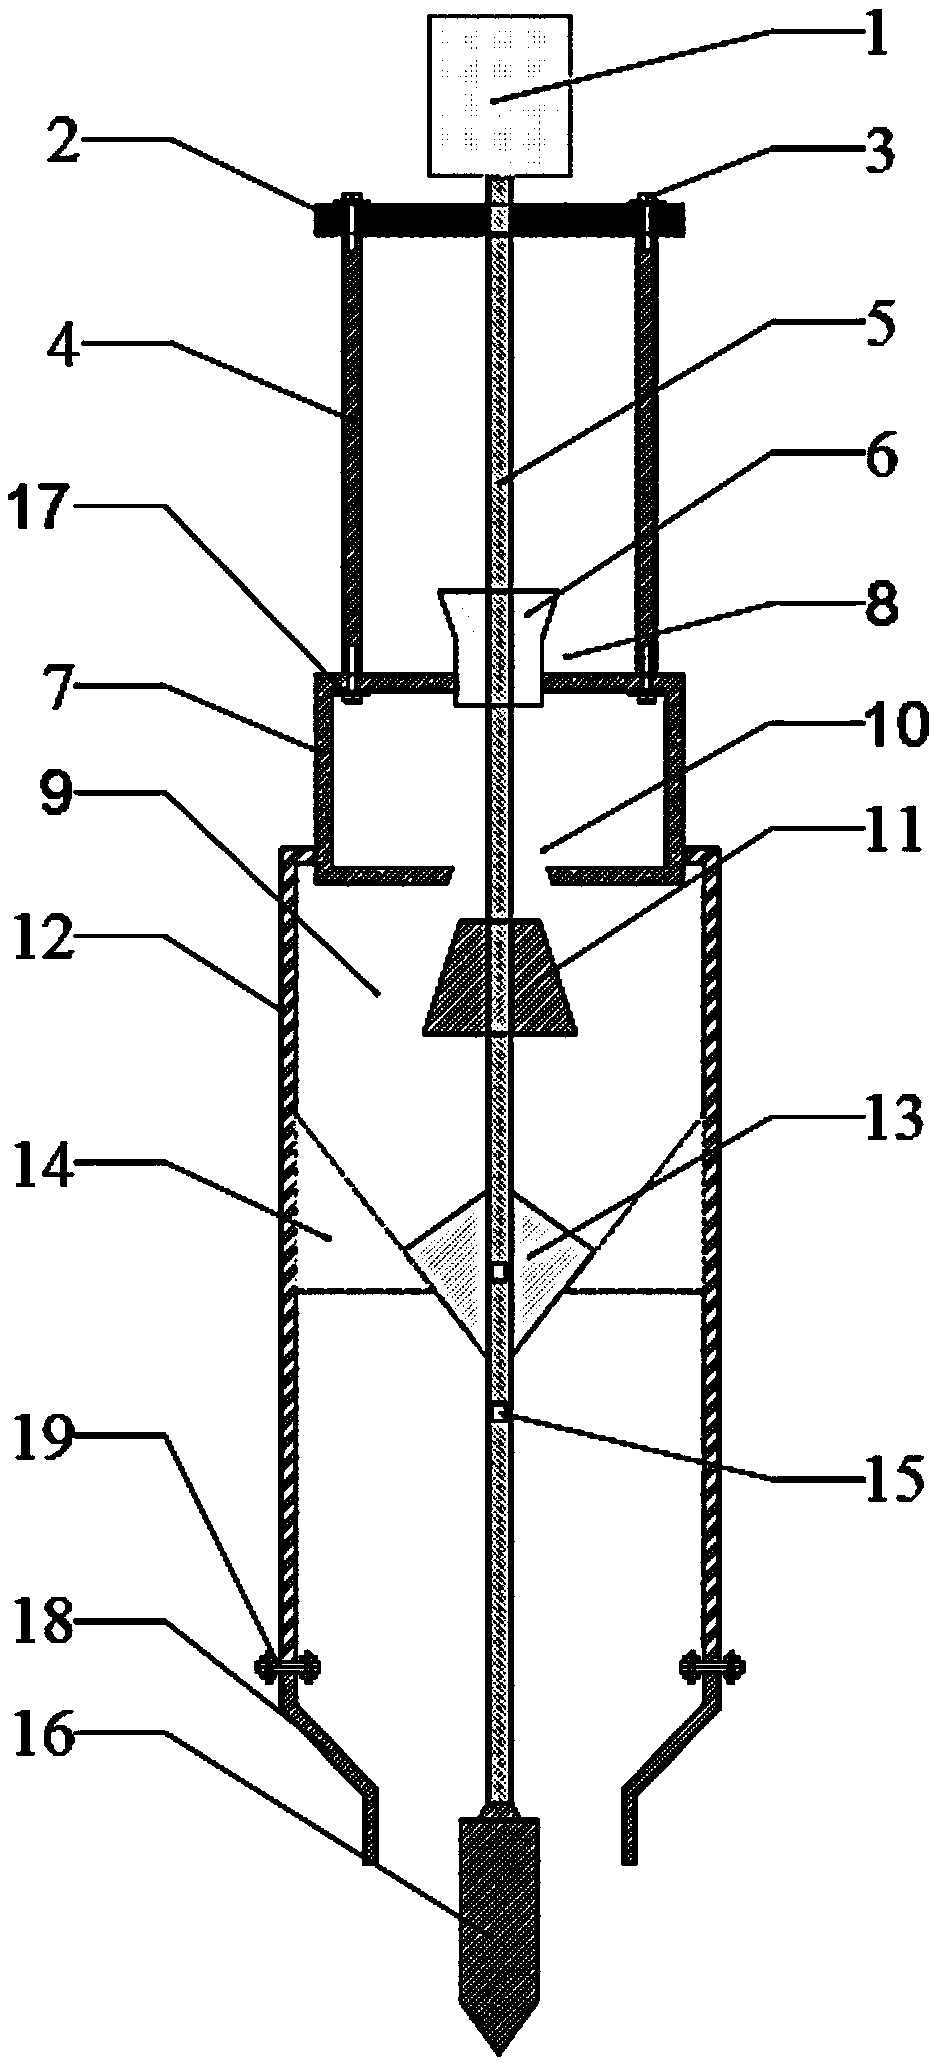 An integrated device for shelling and unloading aluminum electrolytic cell